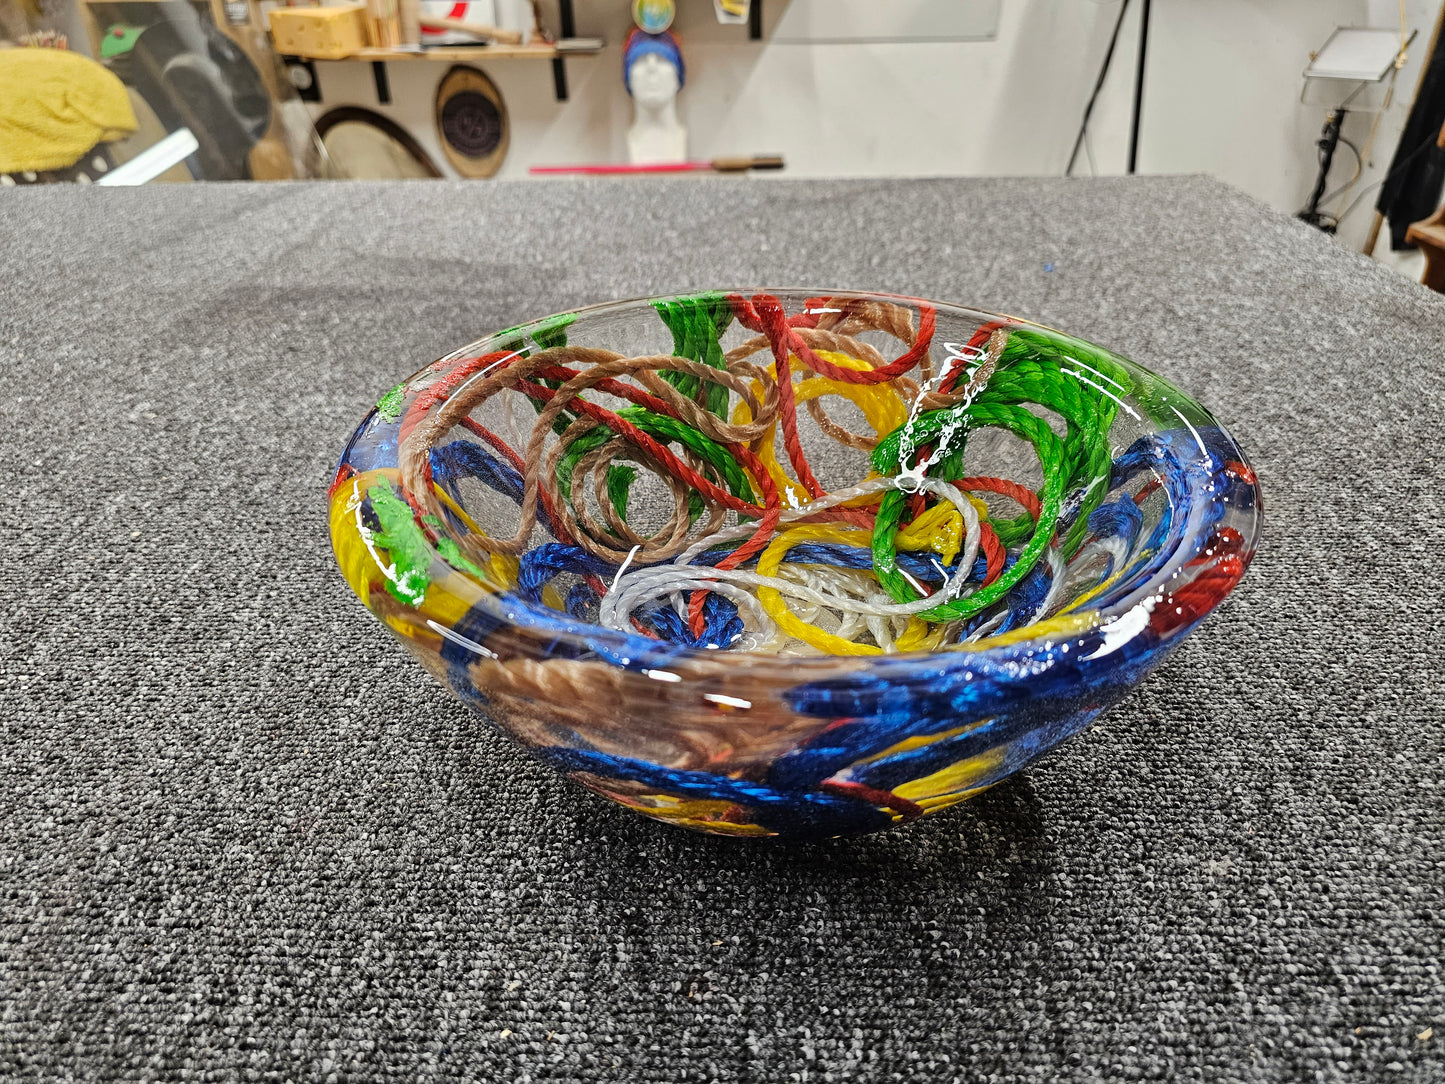 The Rope Bowl